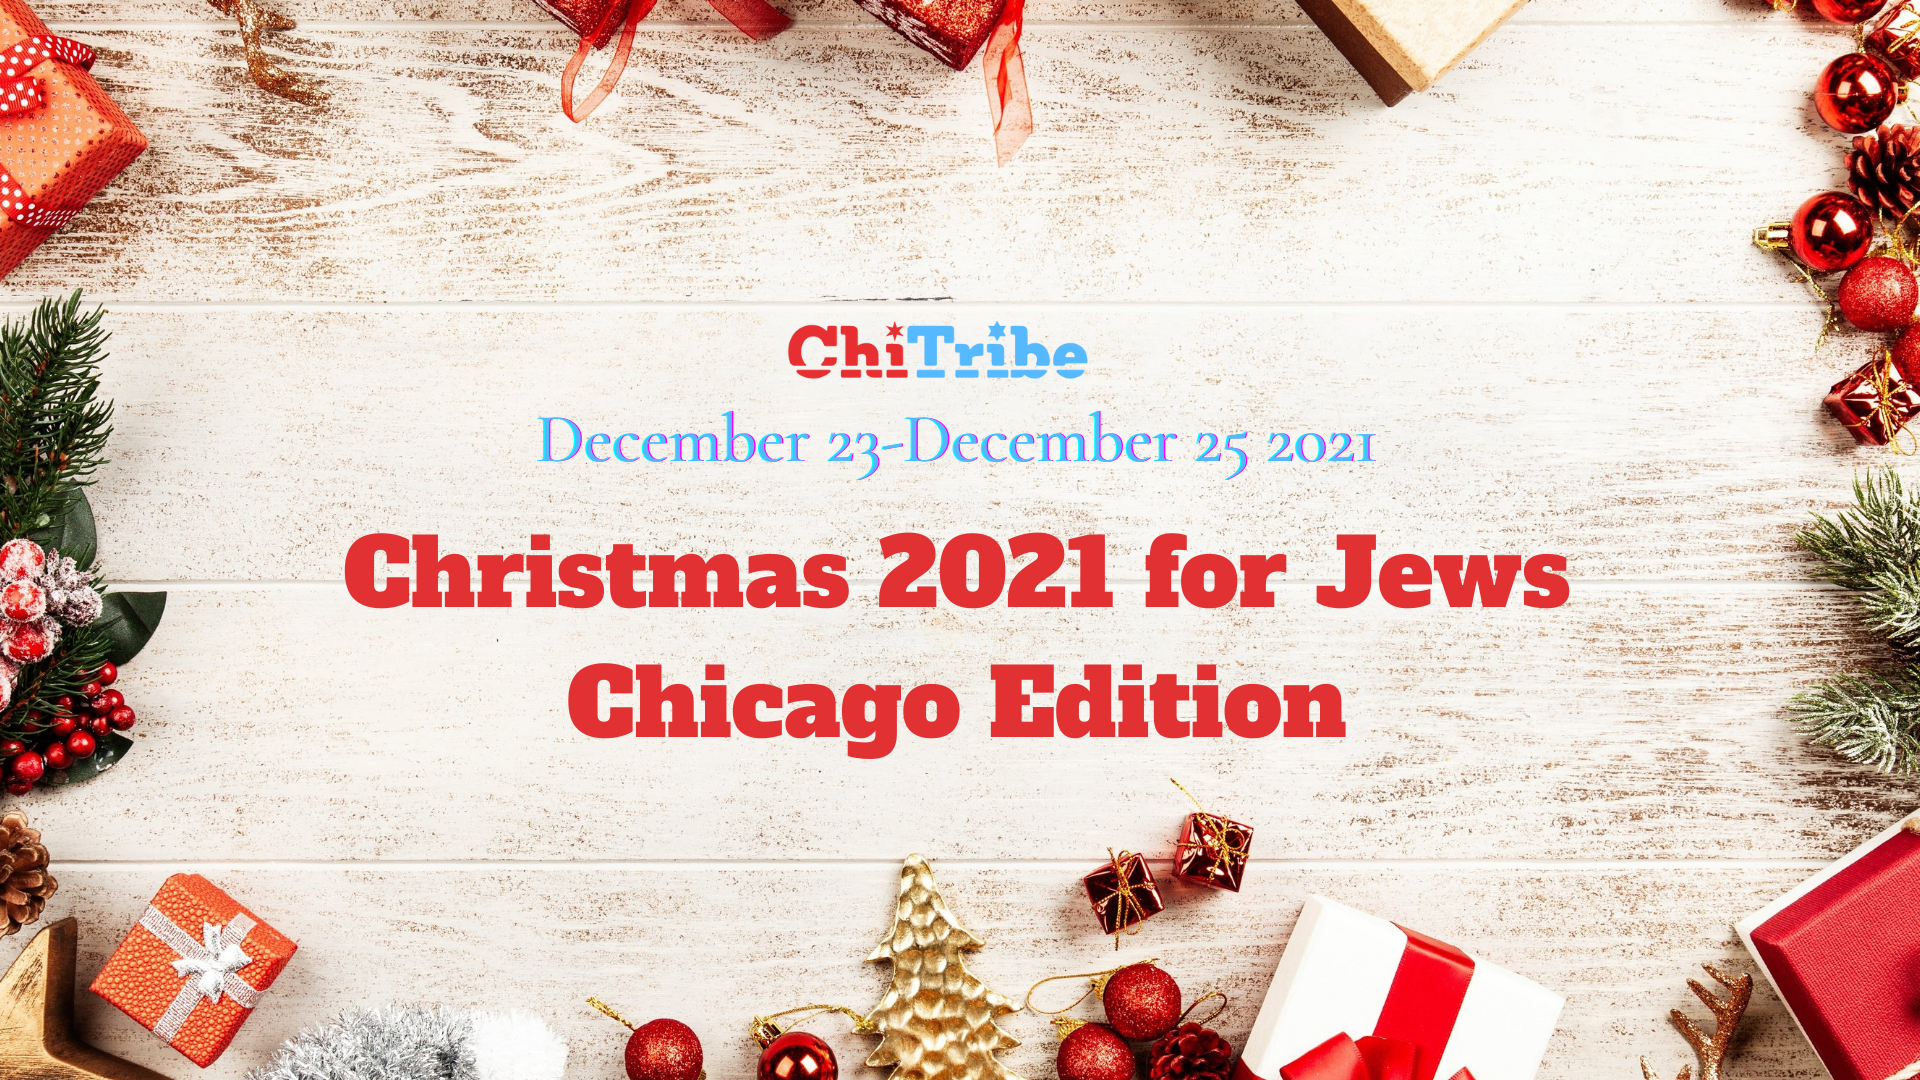 Christmastime for the Jews of Chicago